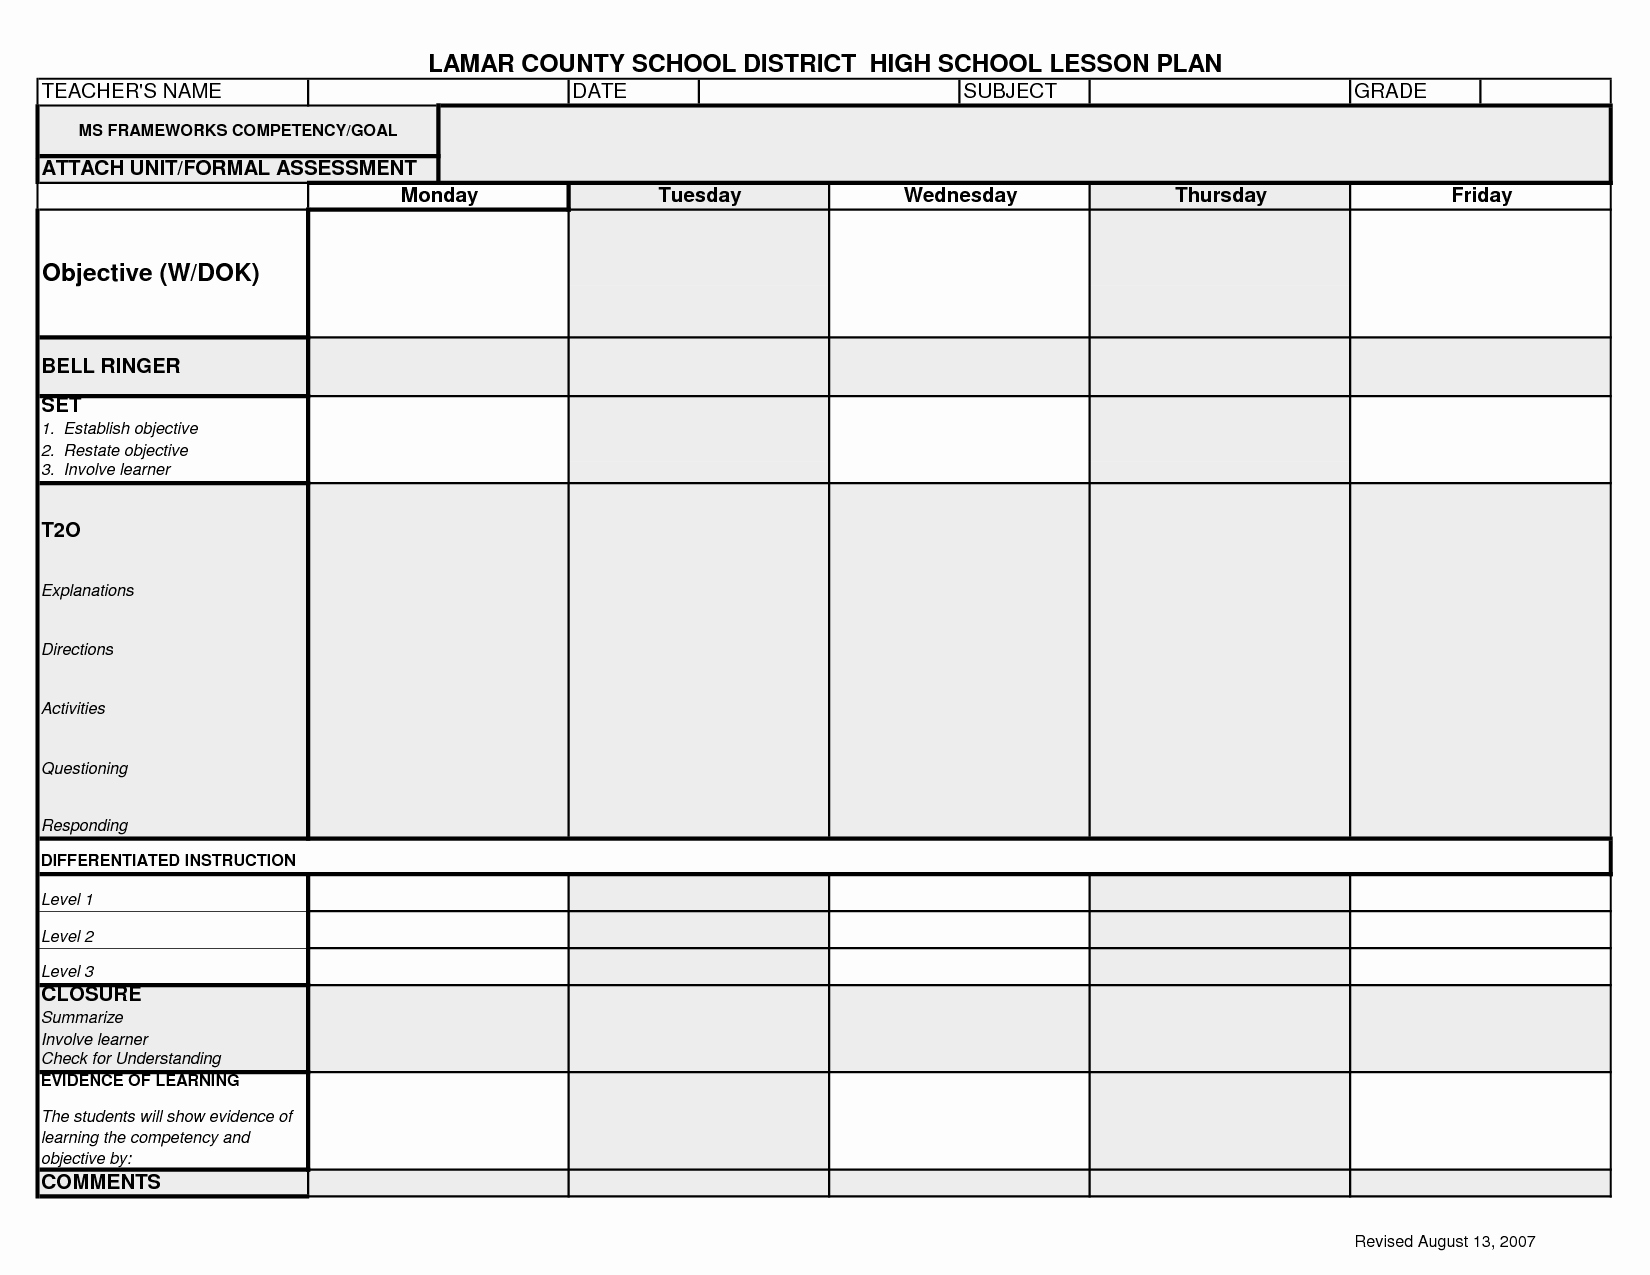 High School Lesson Plan Template Best Of Lcsd High School Lesson Plan Template